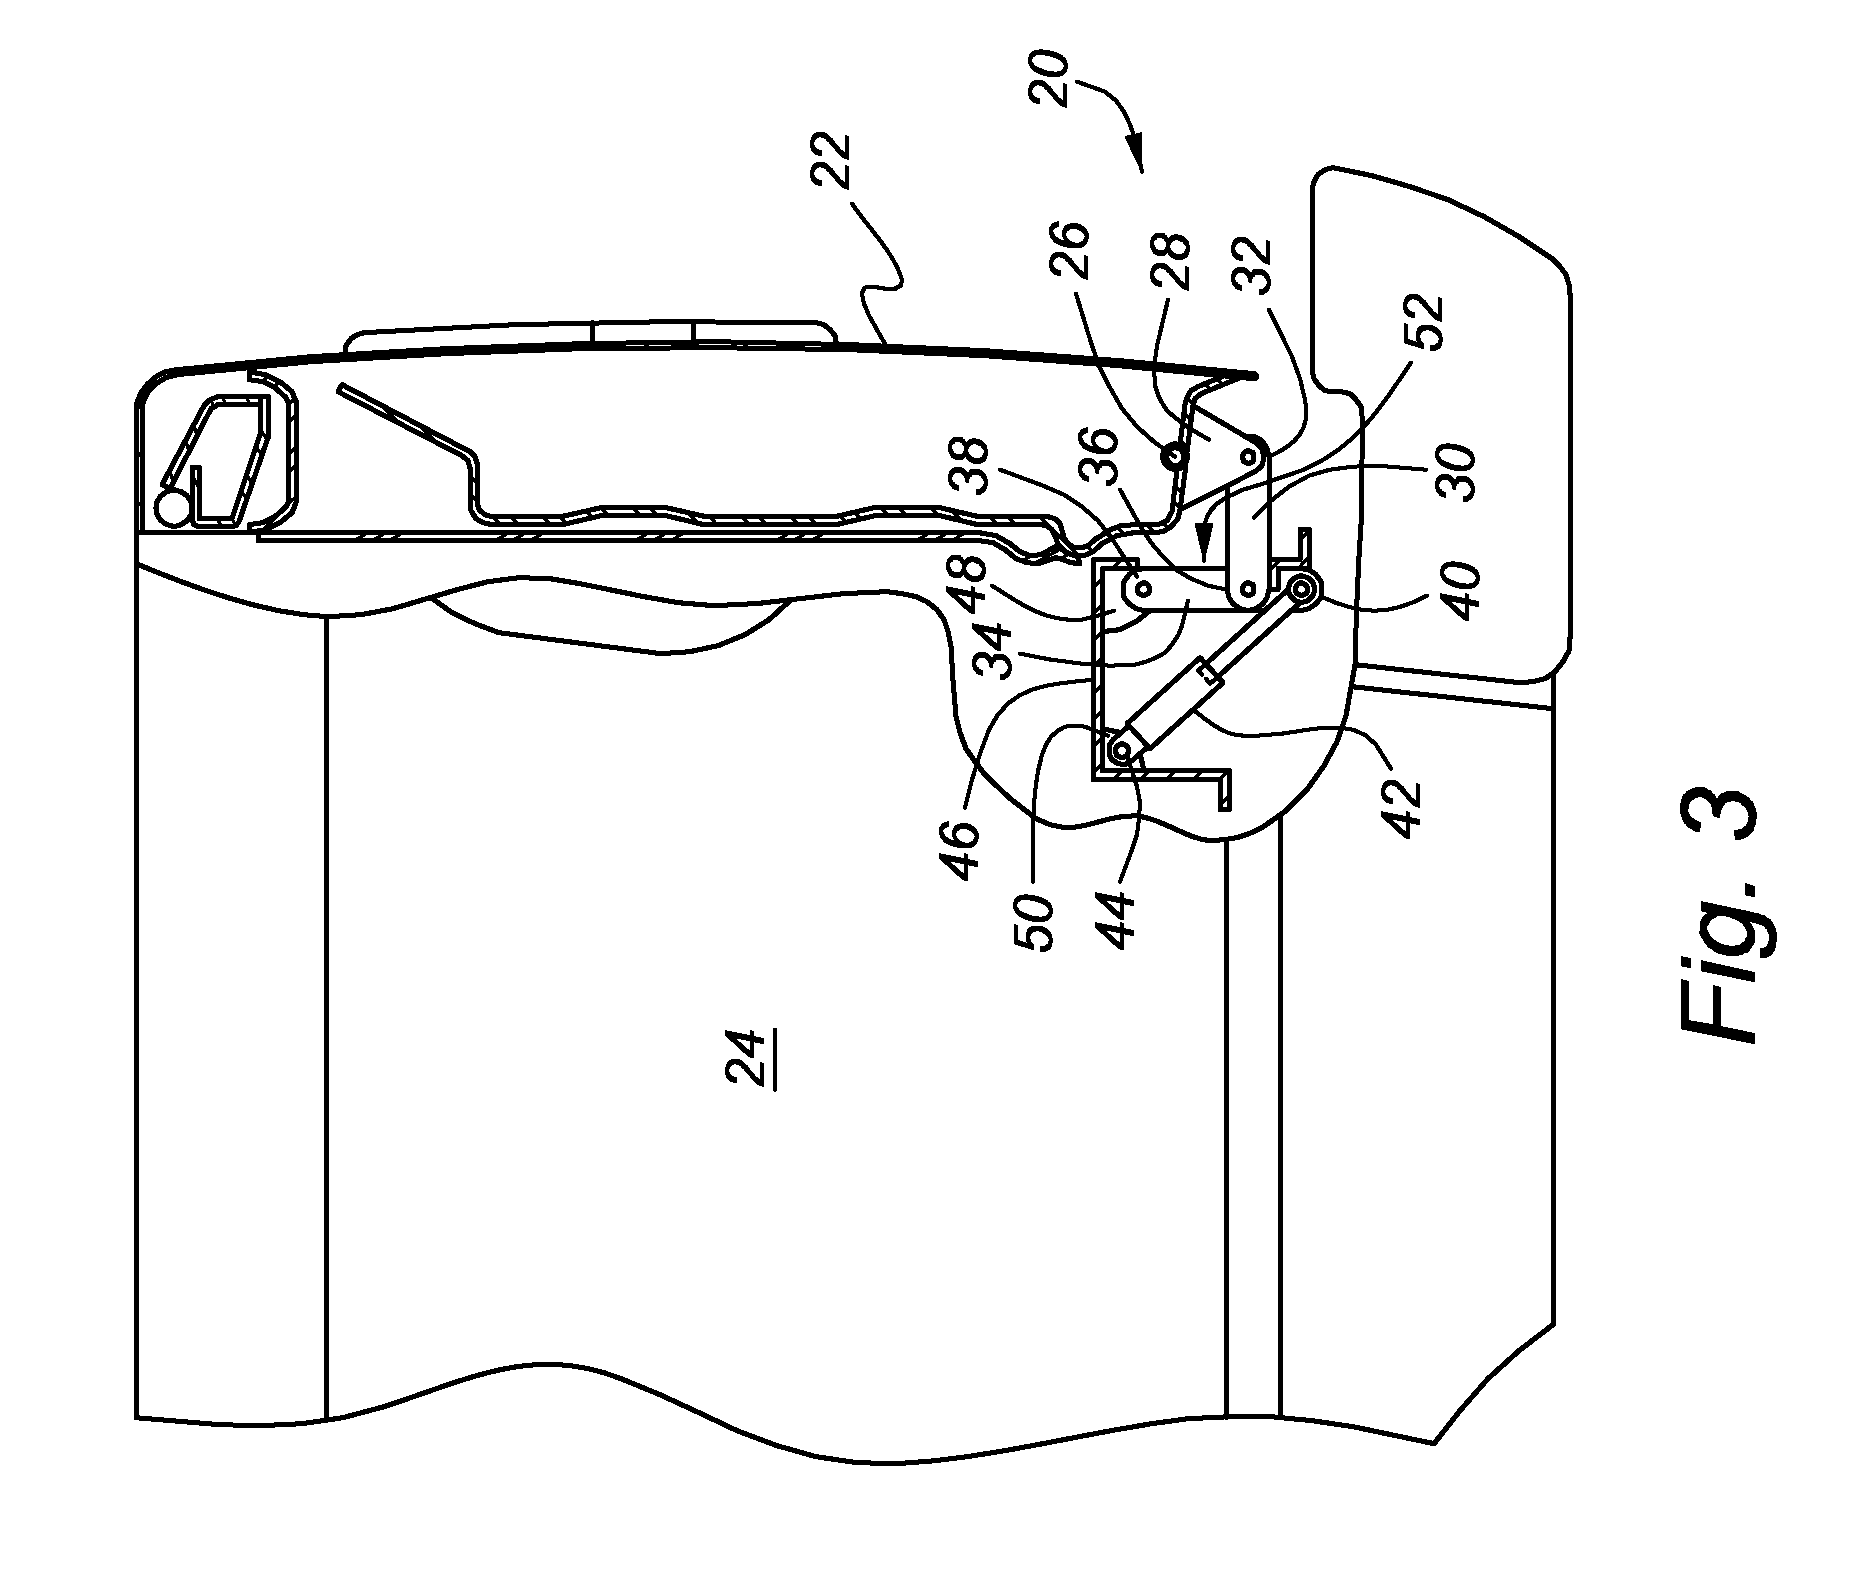 Vehicle tailgate movement assist mechanism using four bar linkage and strut